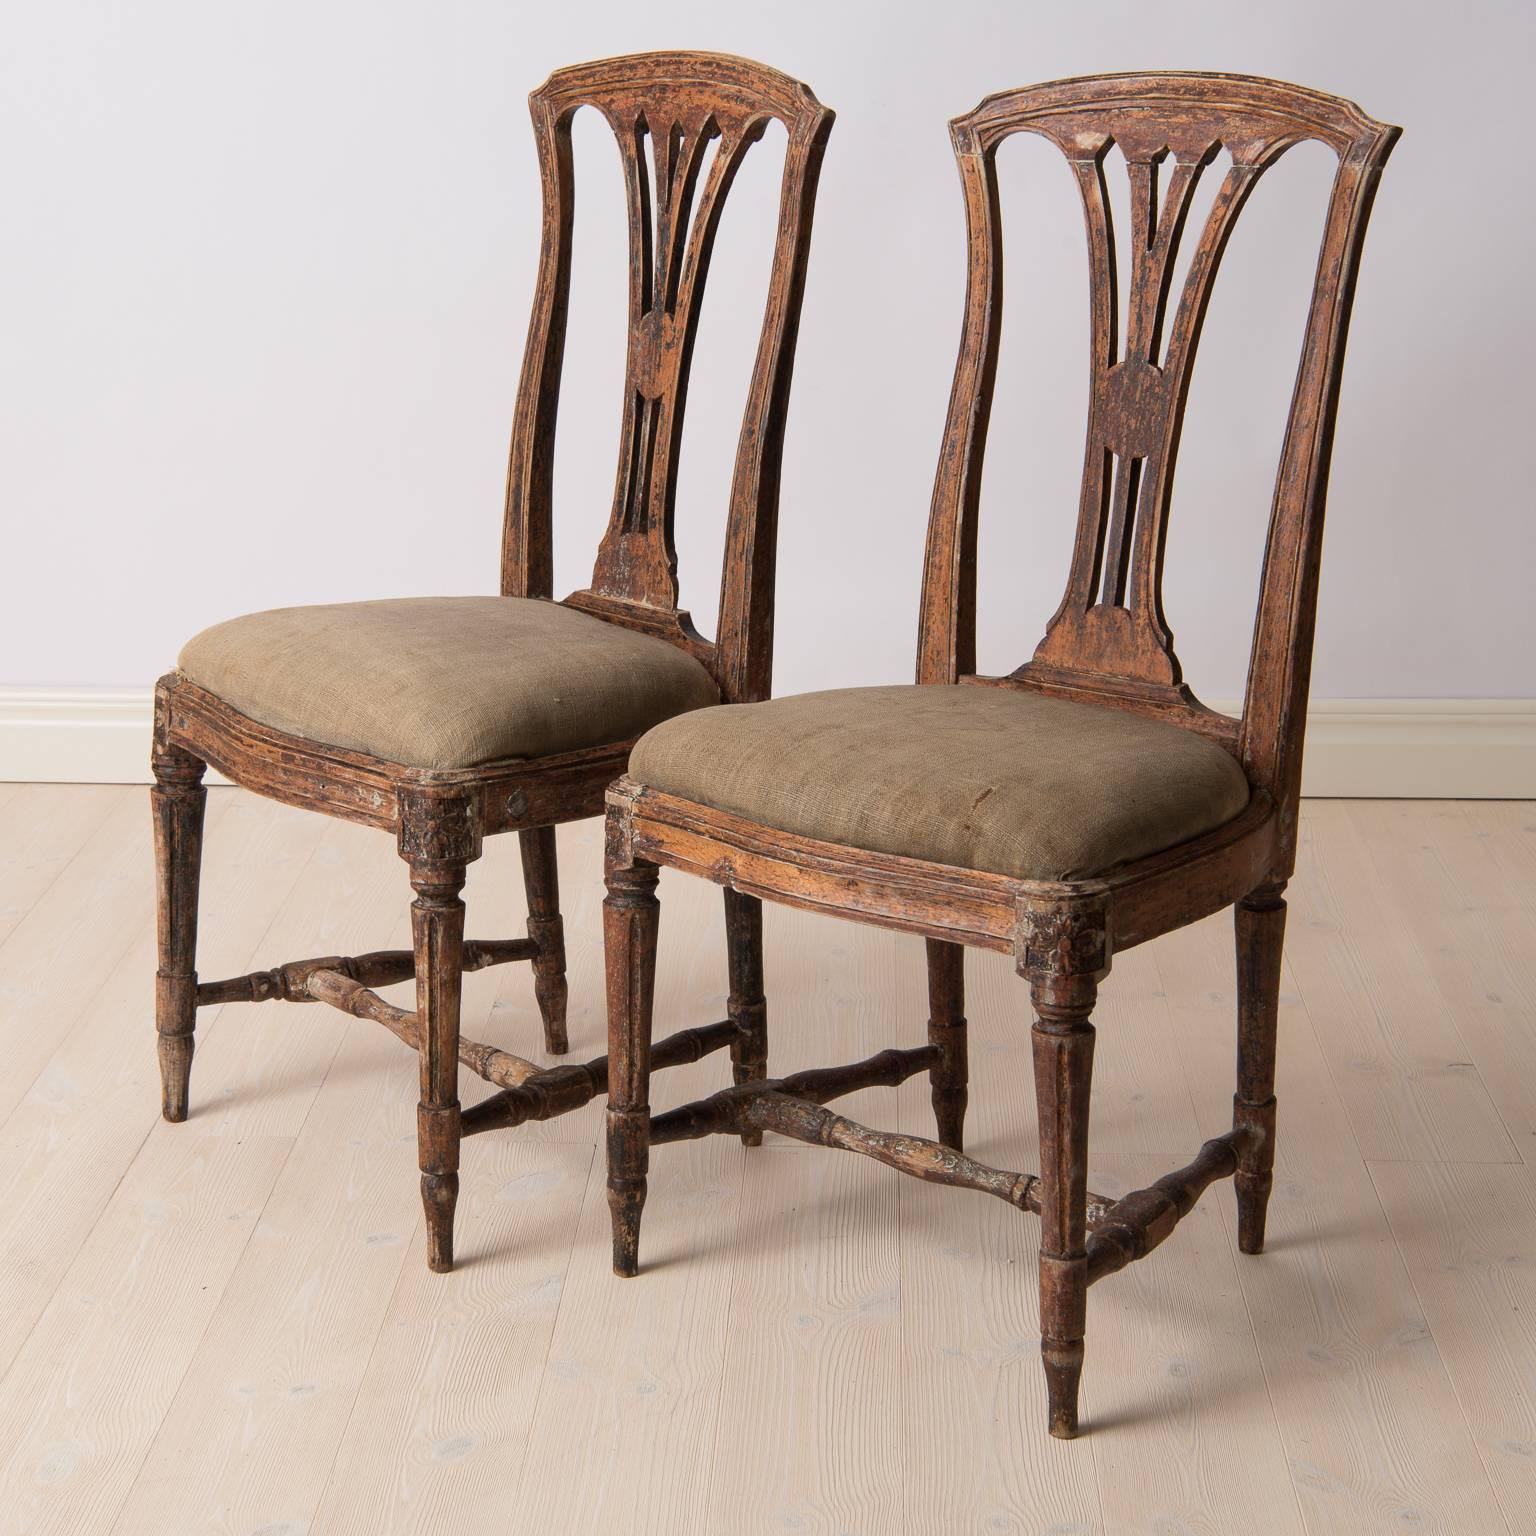 A pair of Gustavian chairs with traces of original paint. Both chairs are really nice quality as they are marked with Stockholm's Chair maker's official seal. Original seats and fabric from the 1770s. Seat height circa 48 cm.